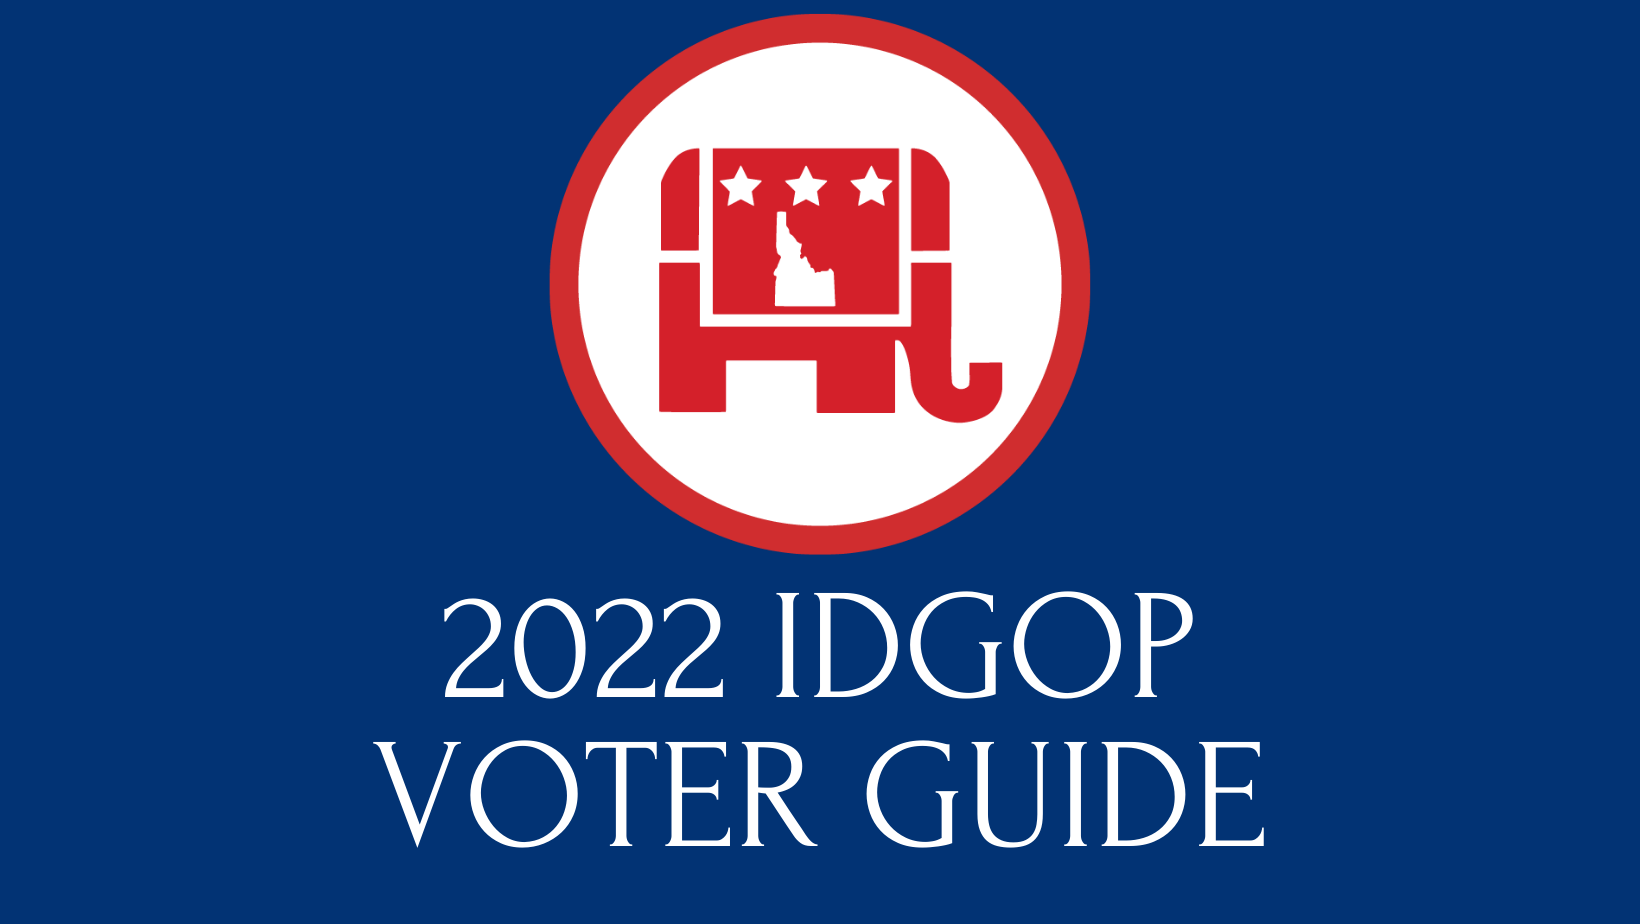 Voter Guide Republican Party of Idaho